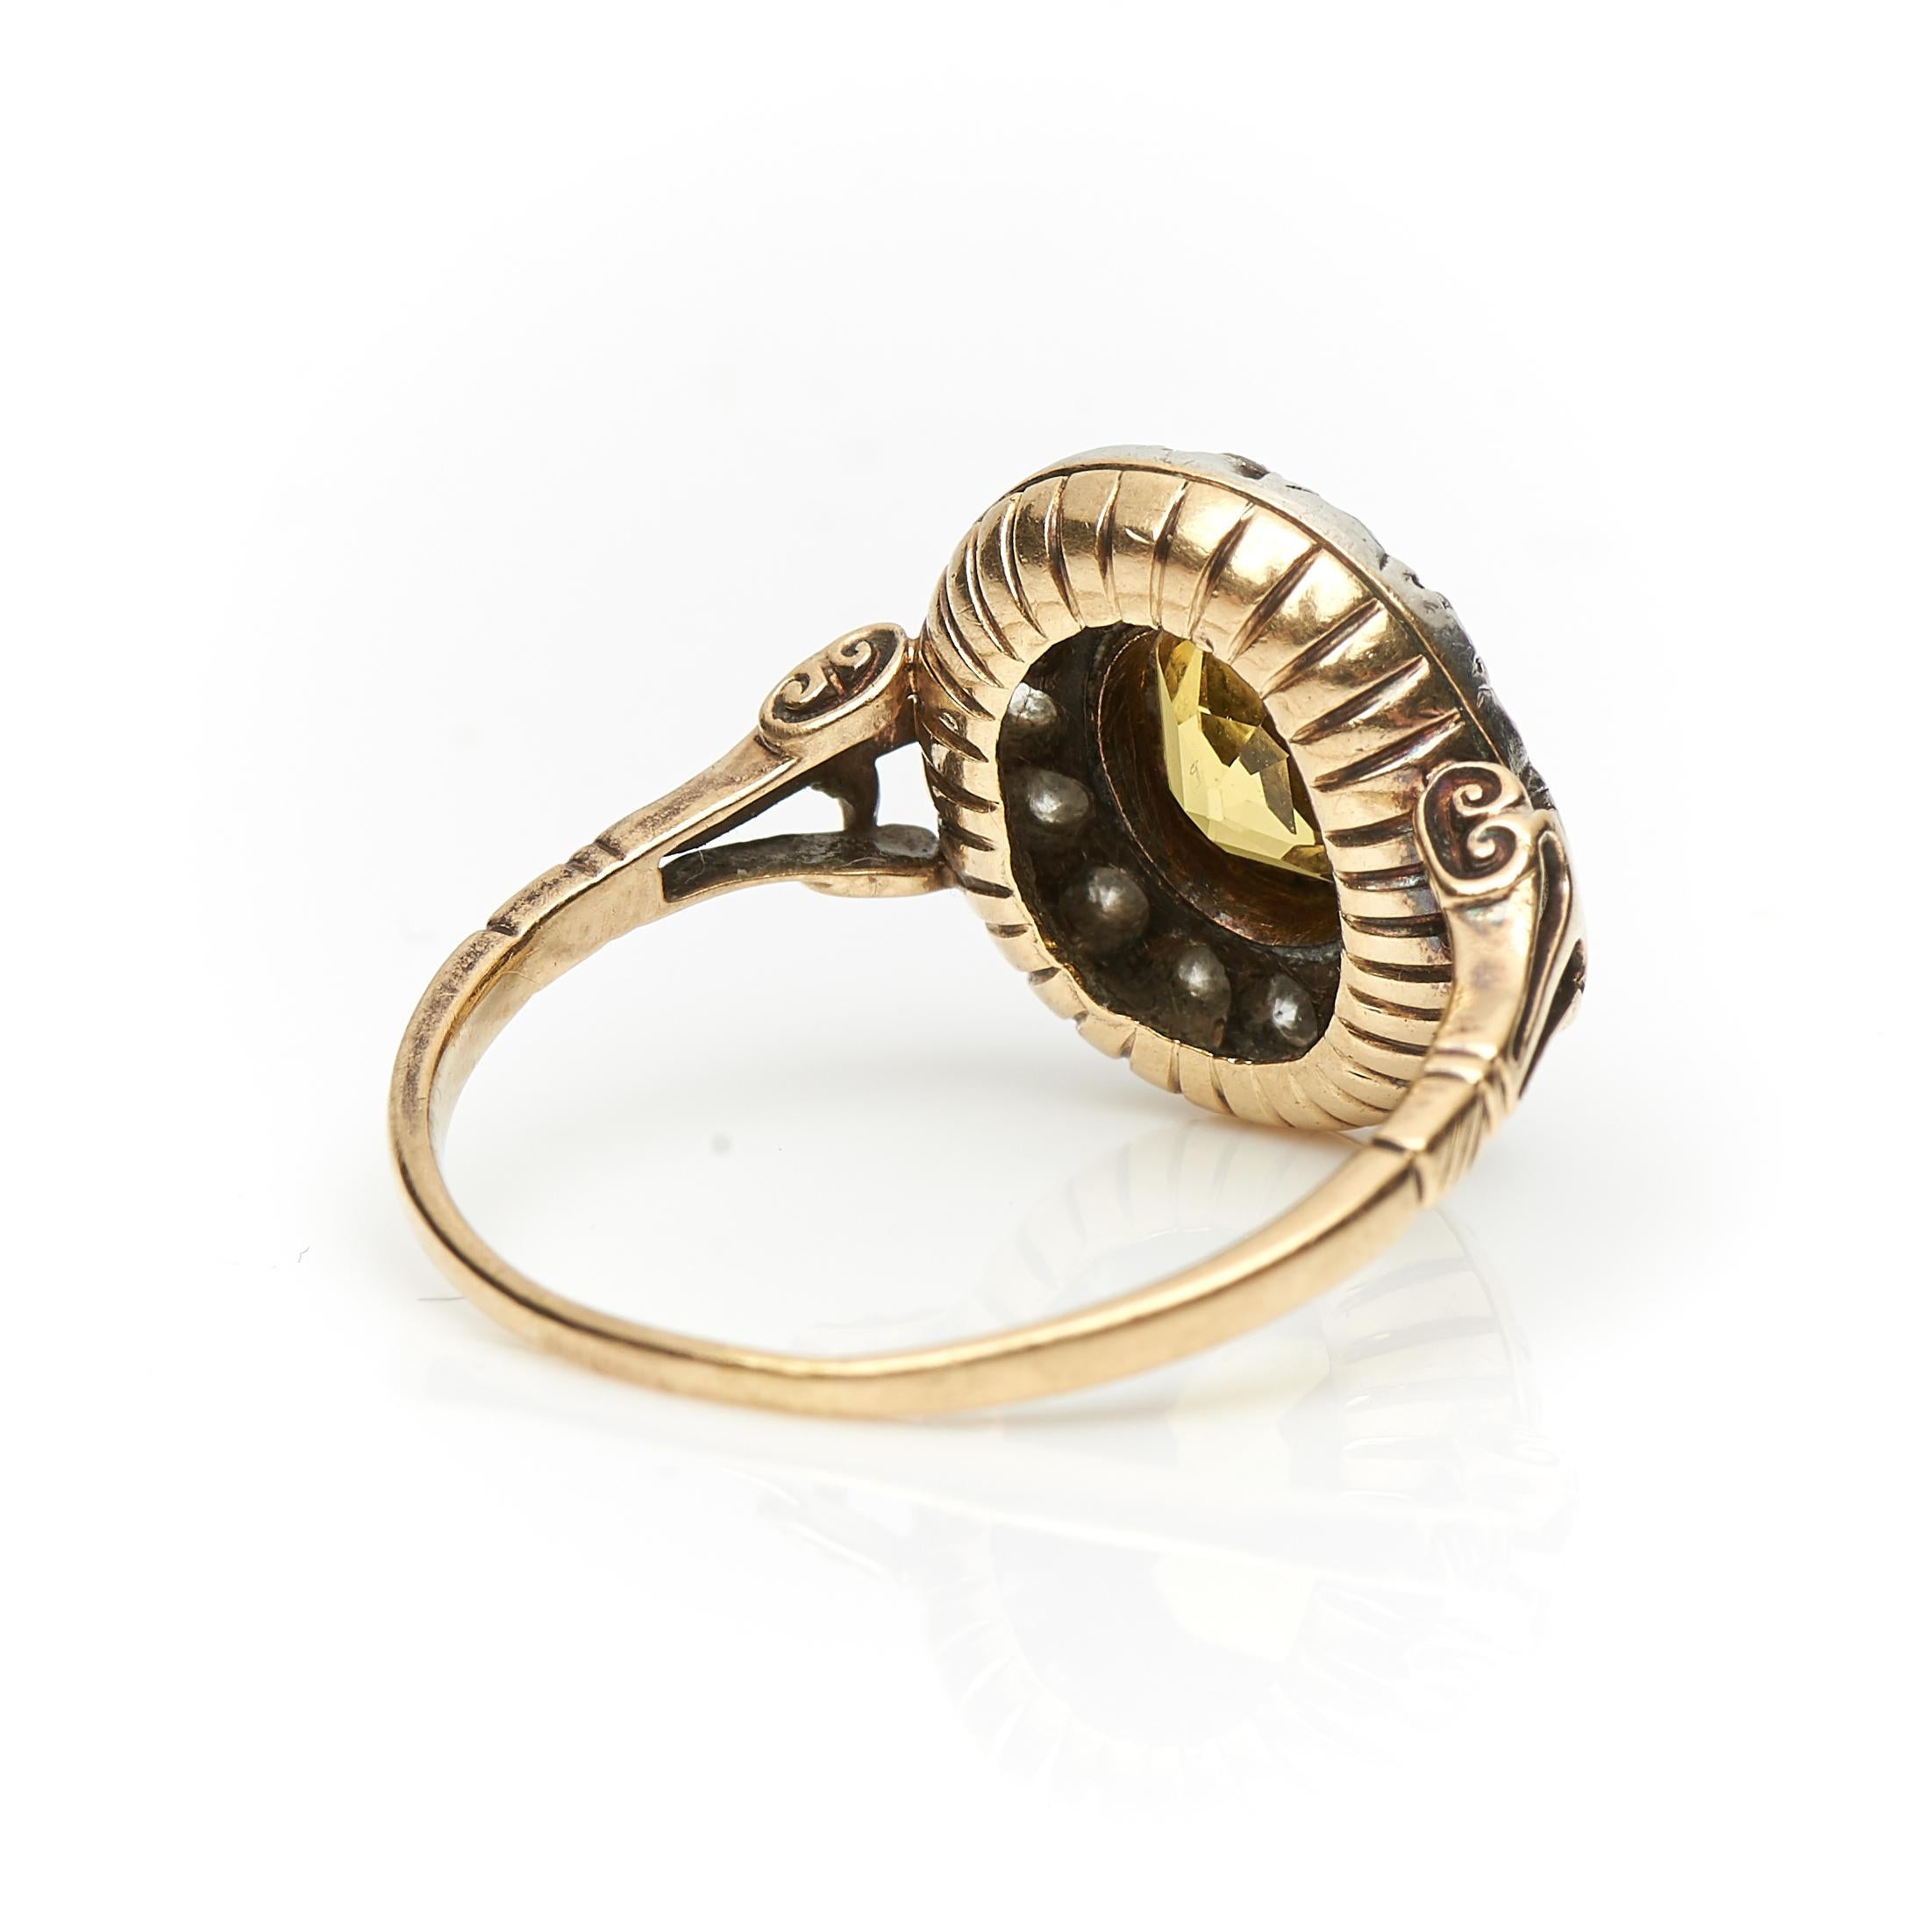 An incredible, 19th century, natural yellow (golden coloured) sapphire and diamond ring, circa 1860. Set to centre a vibrant certified untreated round-cut yellow sapphire encircled by sparkling old-cut diamonds, all set in crimpled style collet